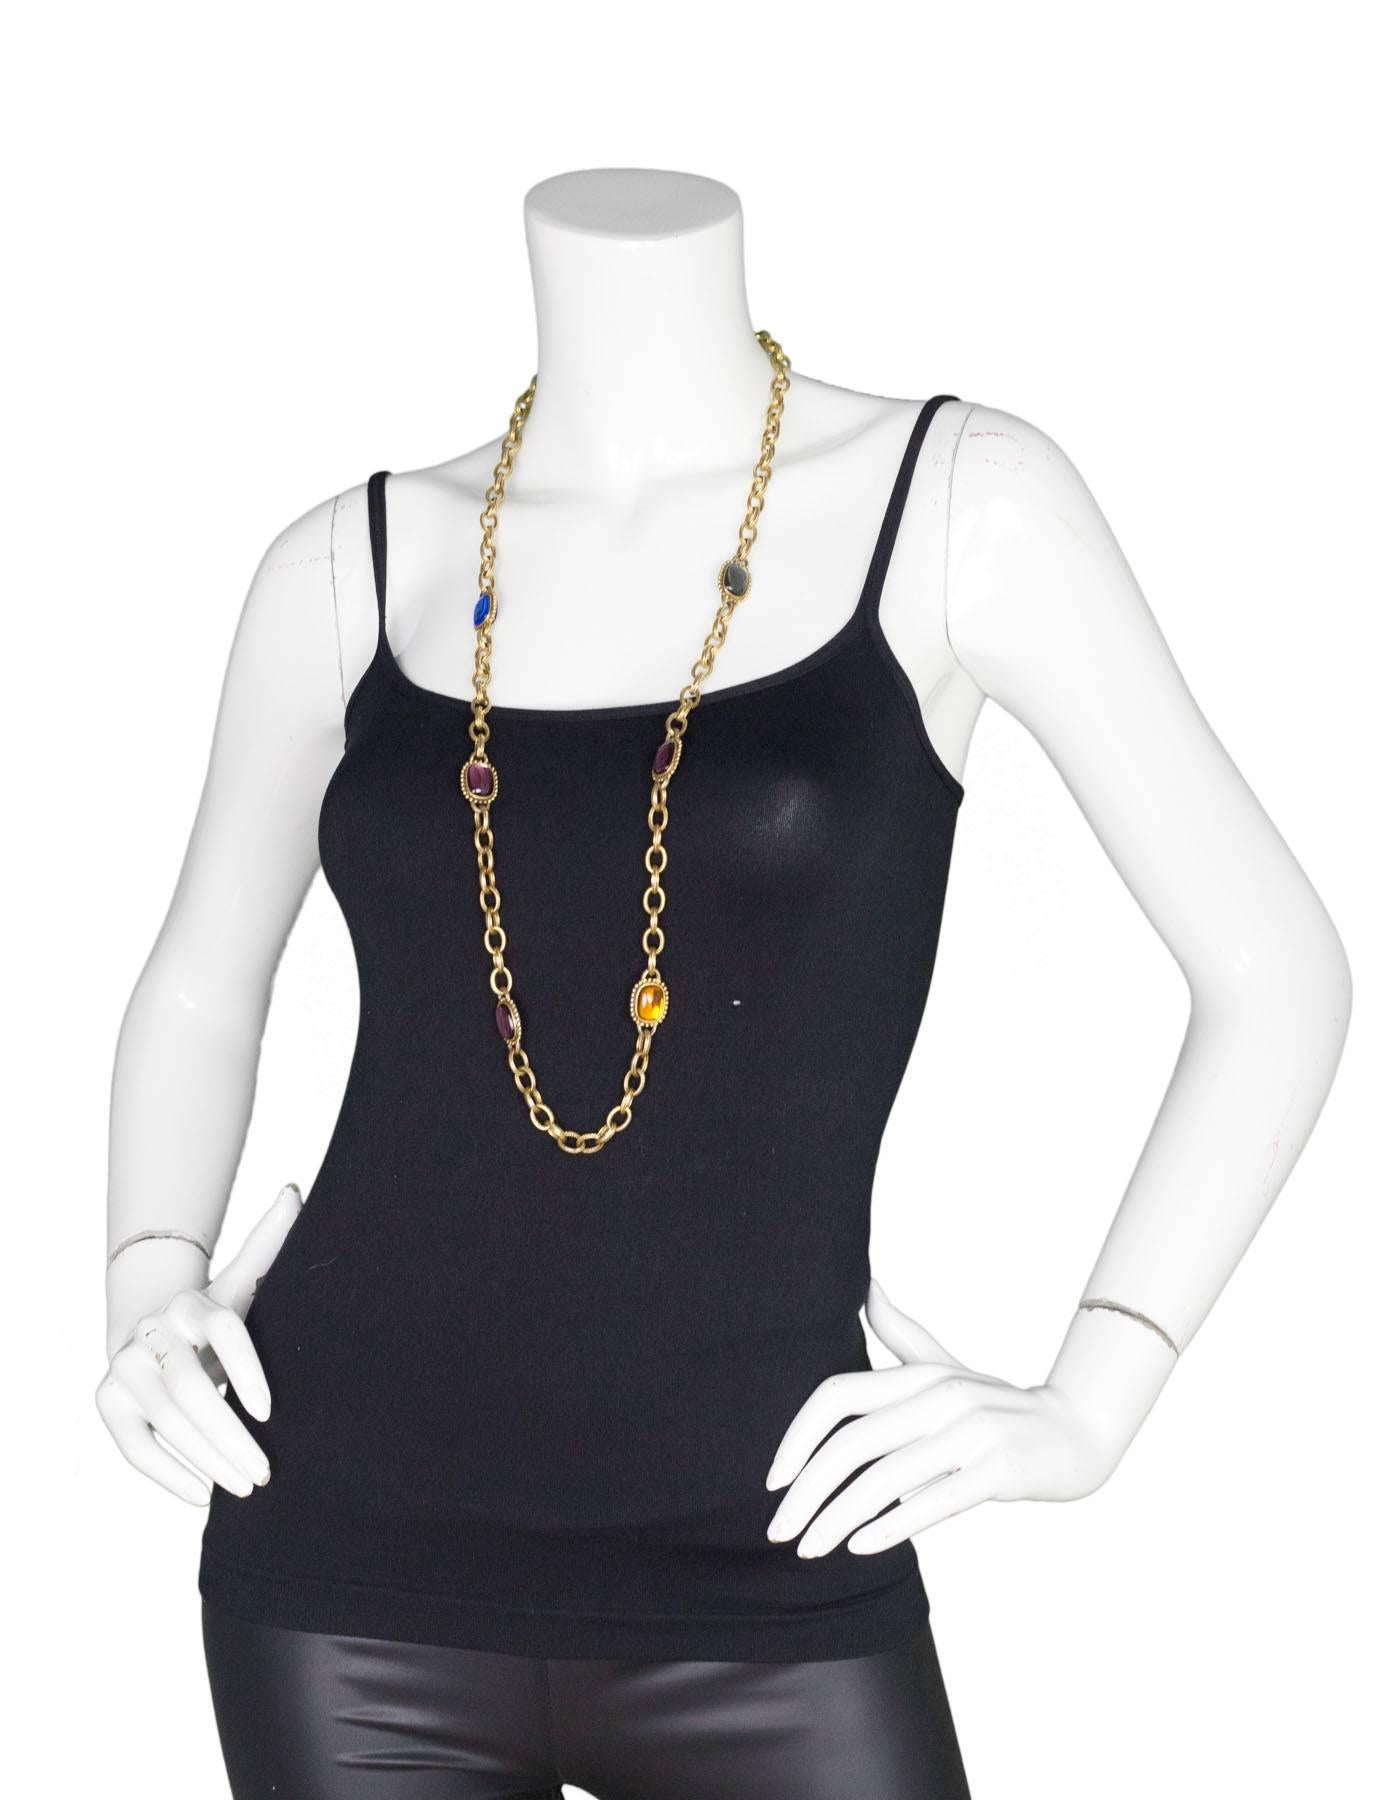 100% Authentic Yves Saint Laurent Vintage Chain Necklace. Features single-strand chain with multi-colored glass beads. Hook closure with YSL logo. Excellent pre-owned condition.

Color: Gold, multi
Materials: Metal, glass
Closure: Hook and